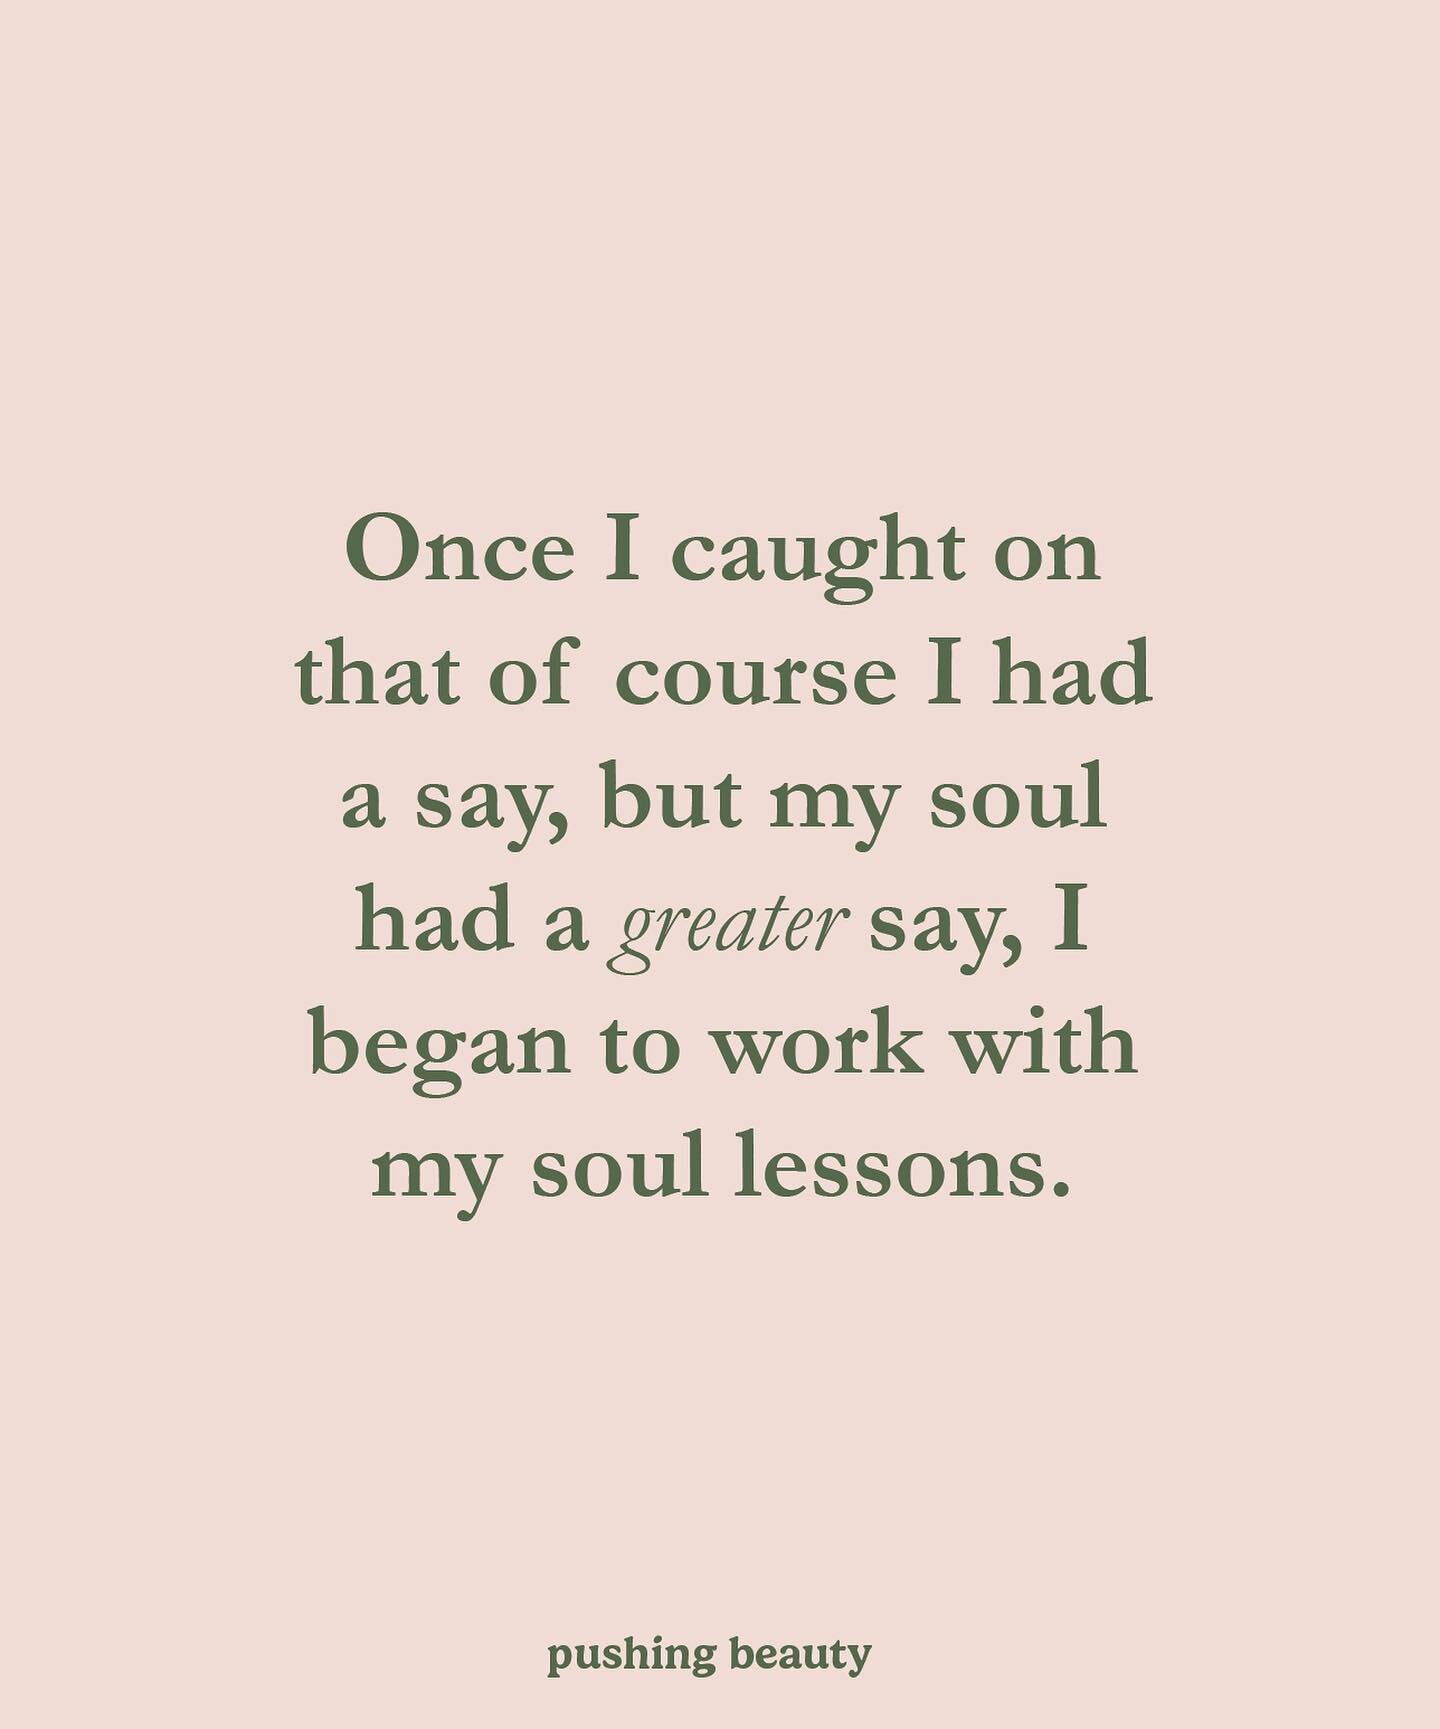 Once I caught on that of course I had a say, but my soul had a greater say, I began to work with my soul lessons.

There were many other milestones throughout this journey. I had to commit to my Breathwork practice and keep showing up even when I fel